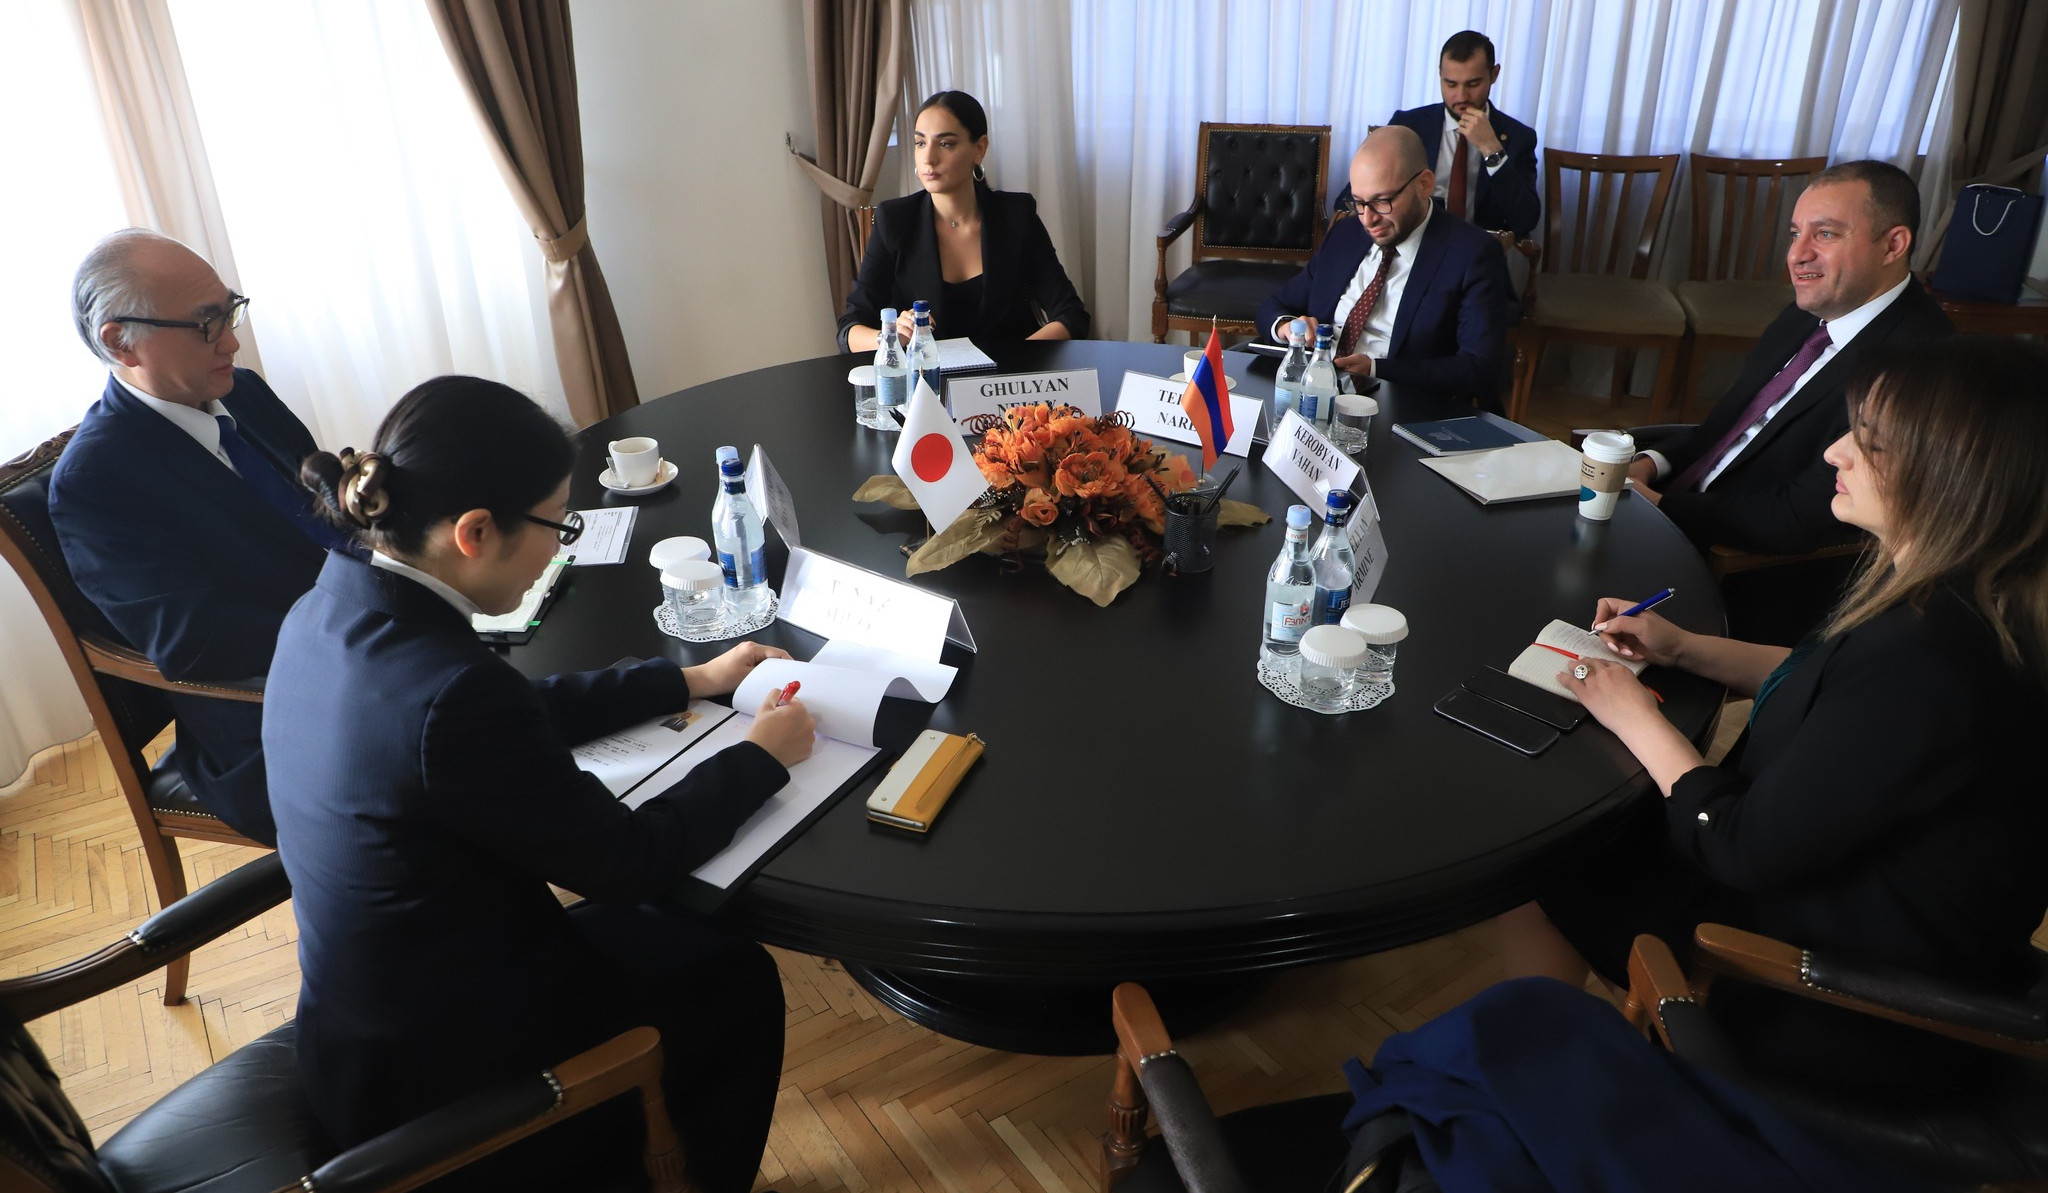 Kerobyan and Japanese ambassador emphasized expansion of business relations between Armenia and Japan